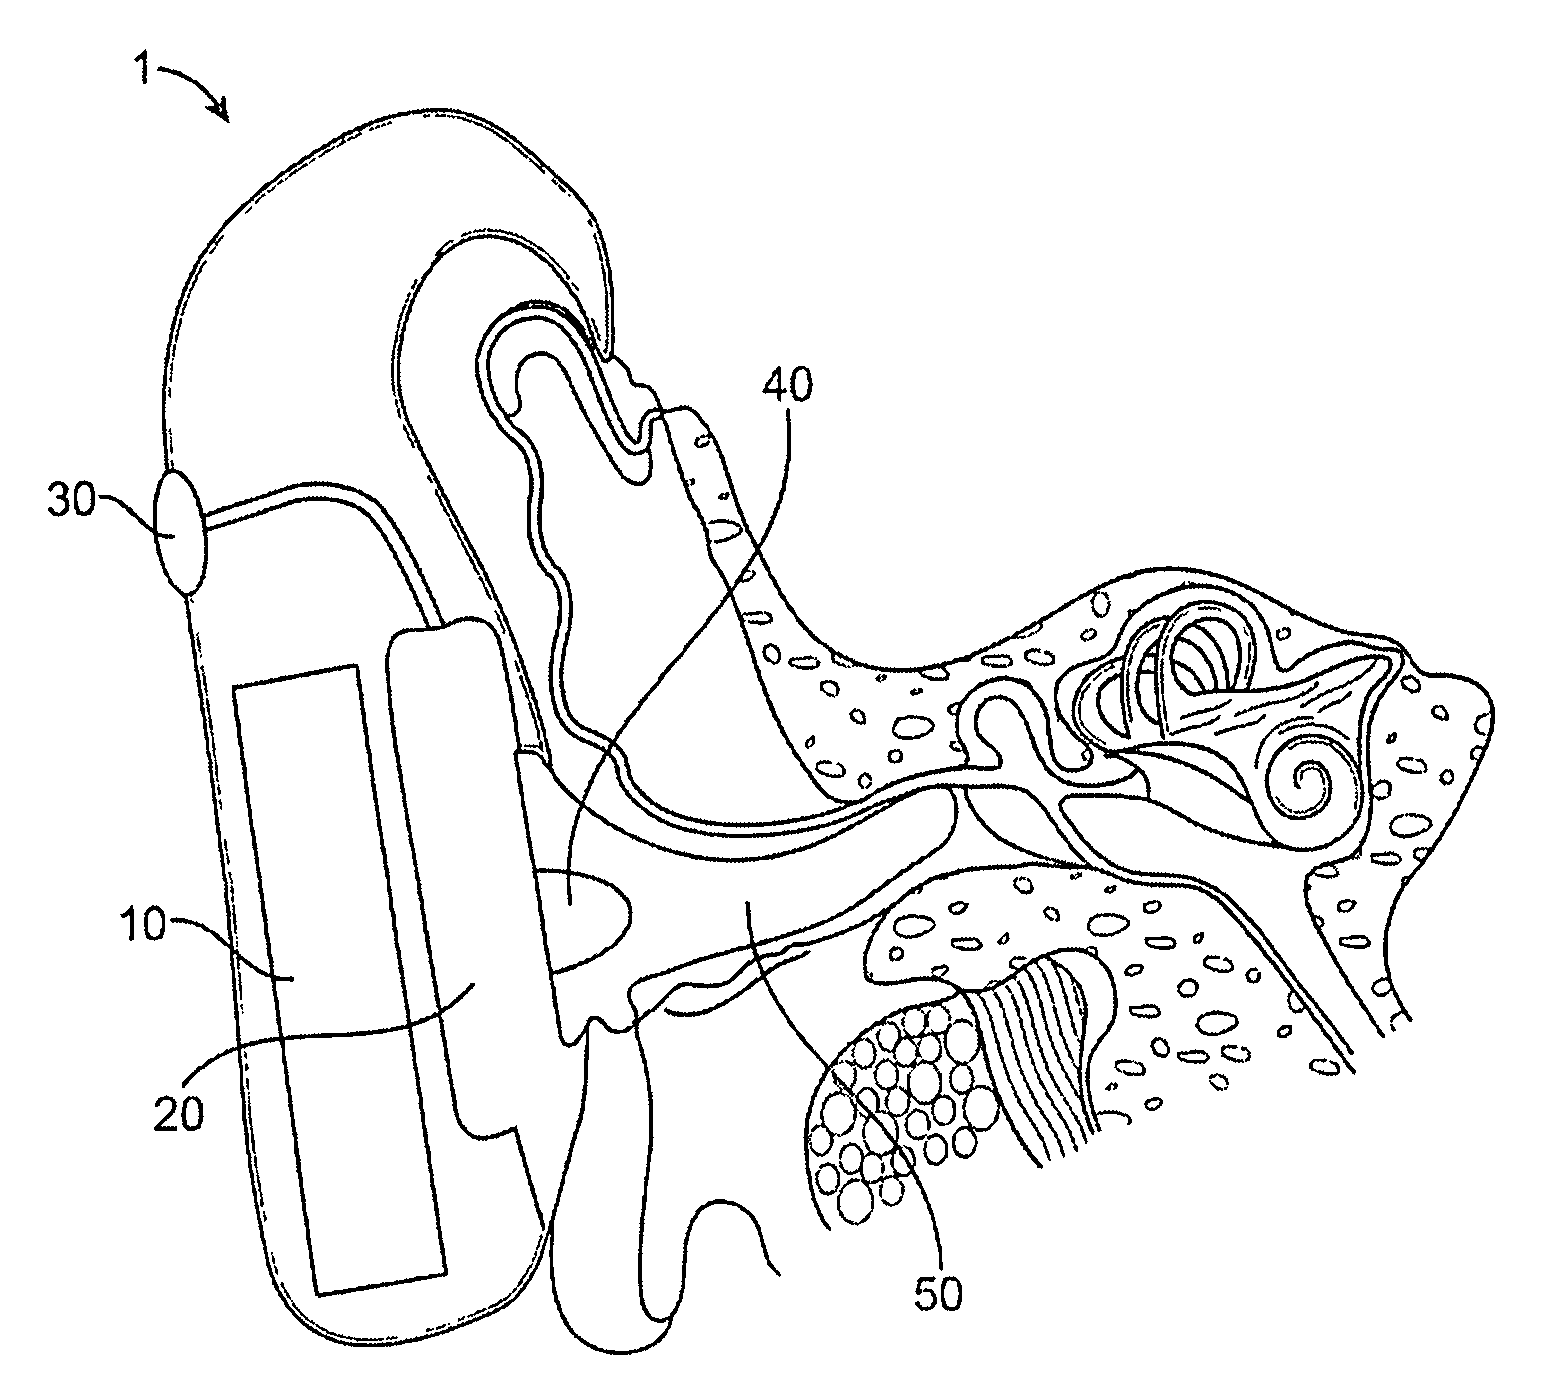 Optical ear infection treatment device and method